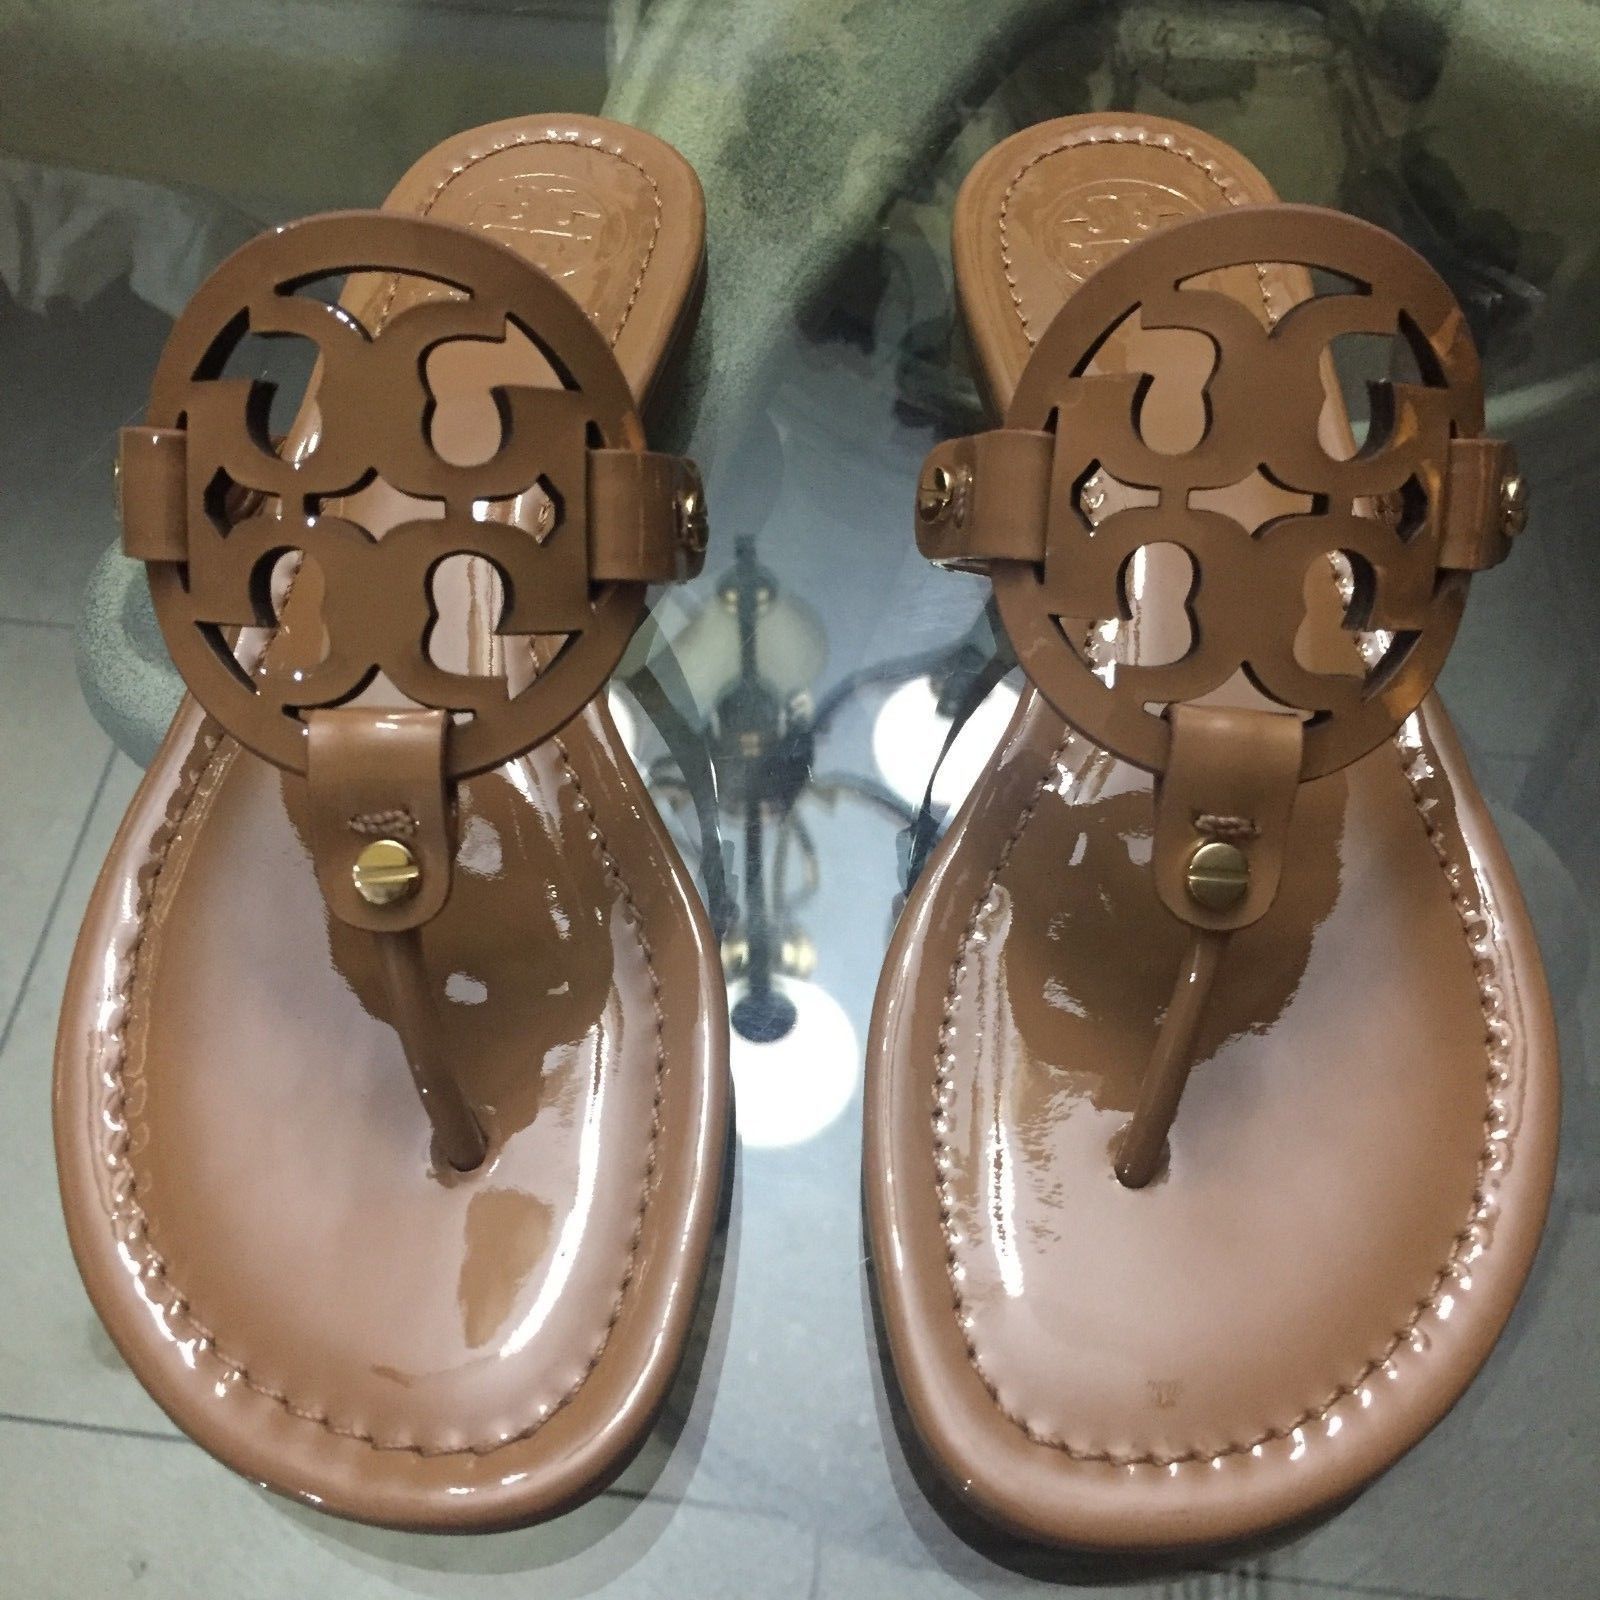 Brand New Tory Burch Miller Sandal Size 7.5 Sand Patent - Sandals